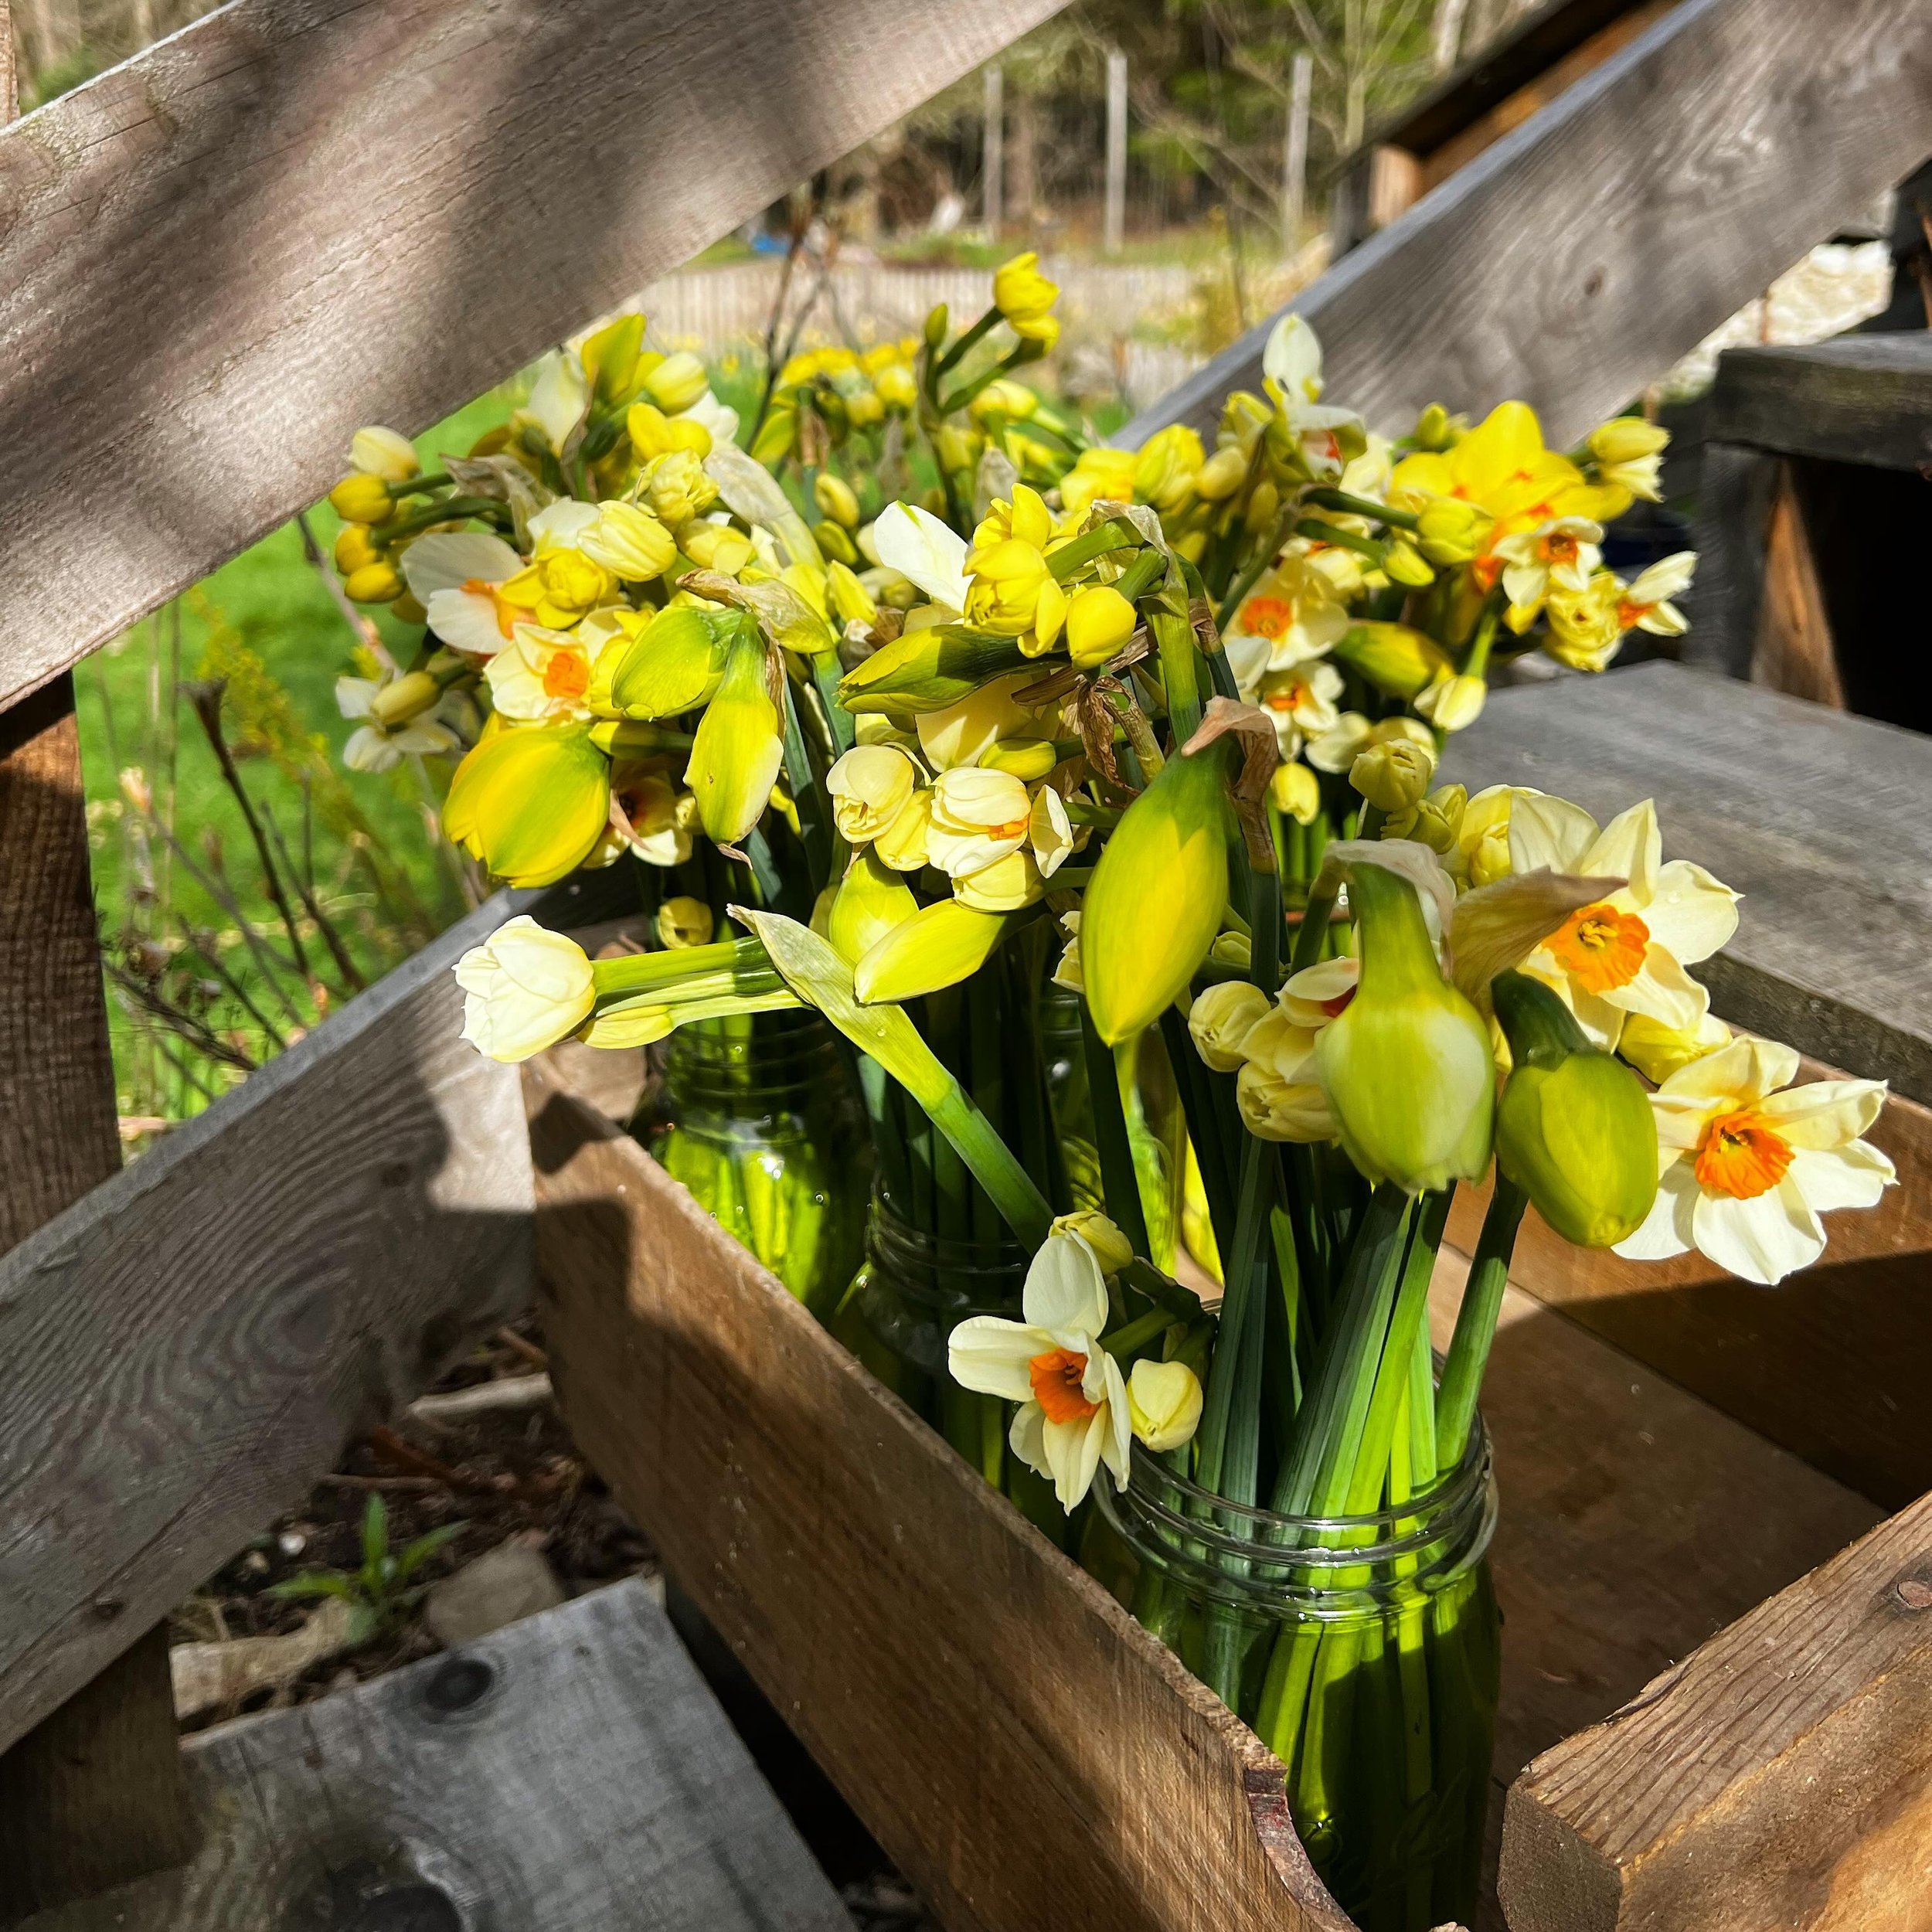 Sent-sational daffodils at @grassrootsyoga159 this week. Stop by before and after classes to grab your bouquet!